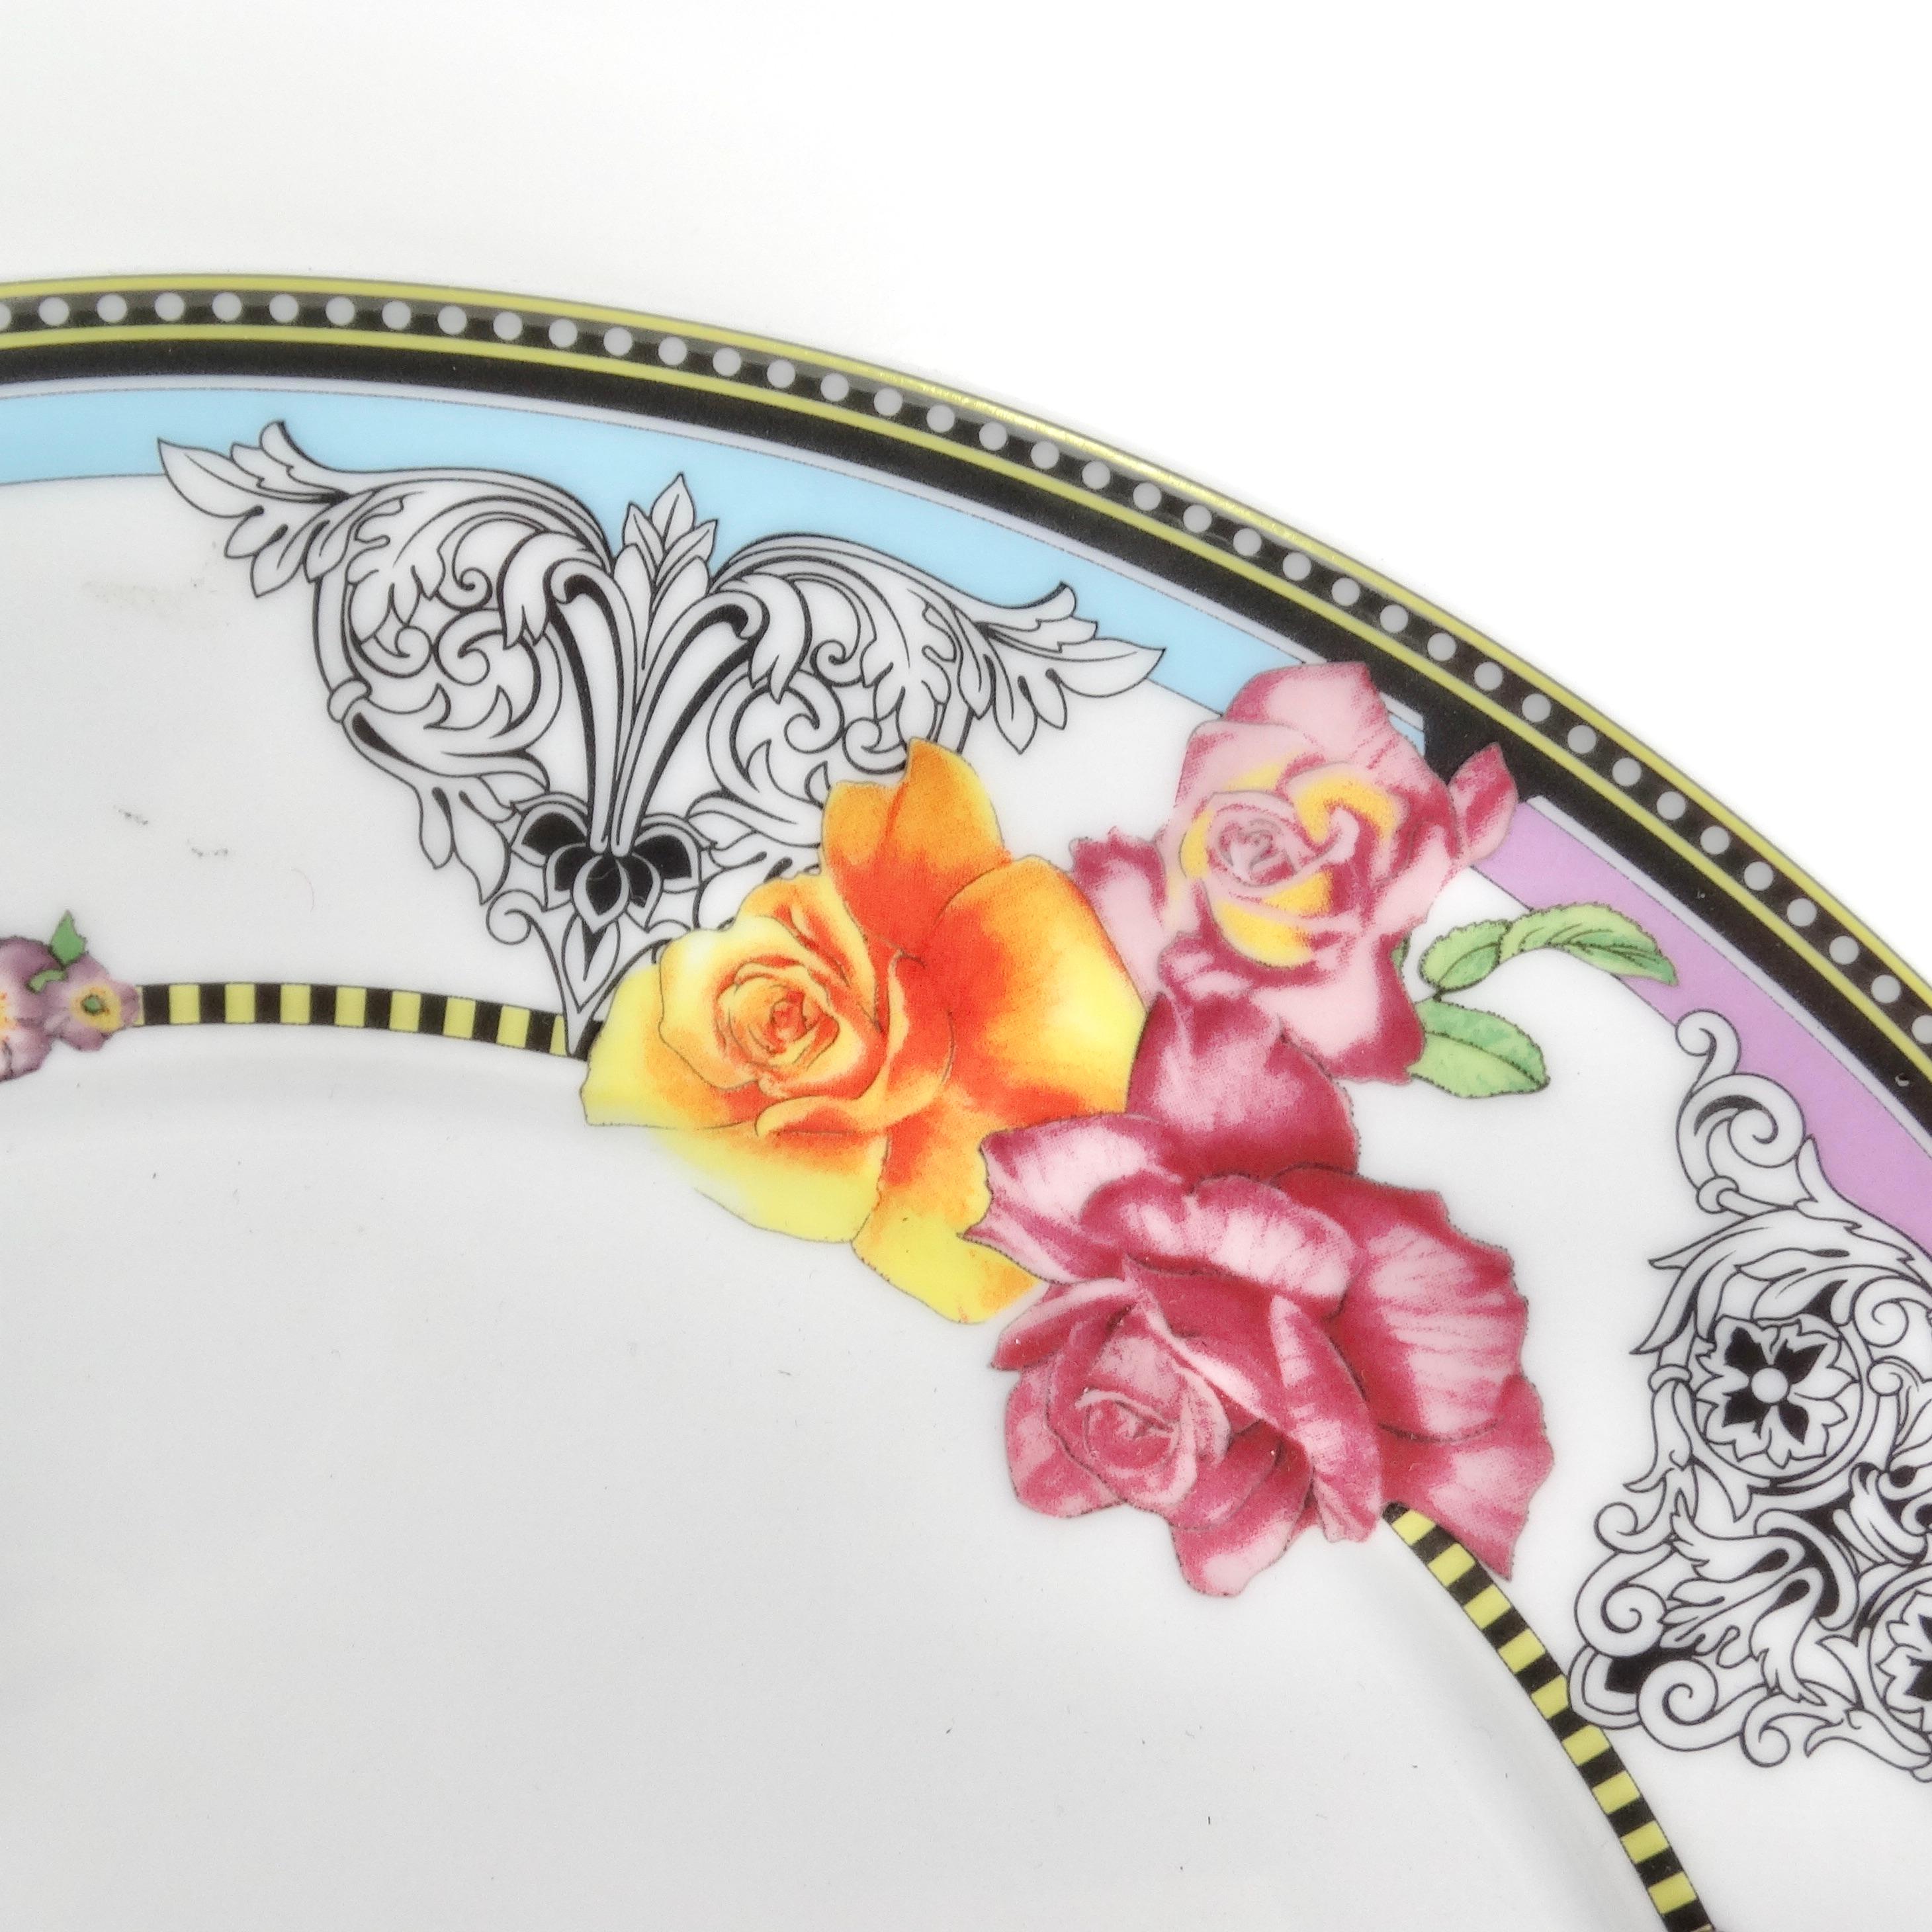 Versace Rosenthal 1990s Porcelain Hot Flowers Salad Plate In Excellent Condition For Sale In Scottsdale, AZ